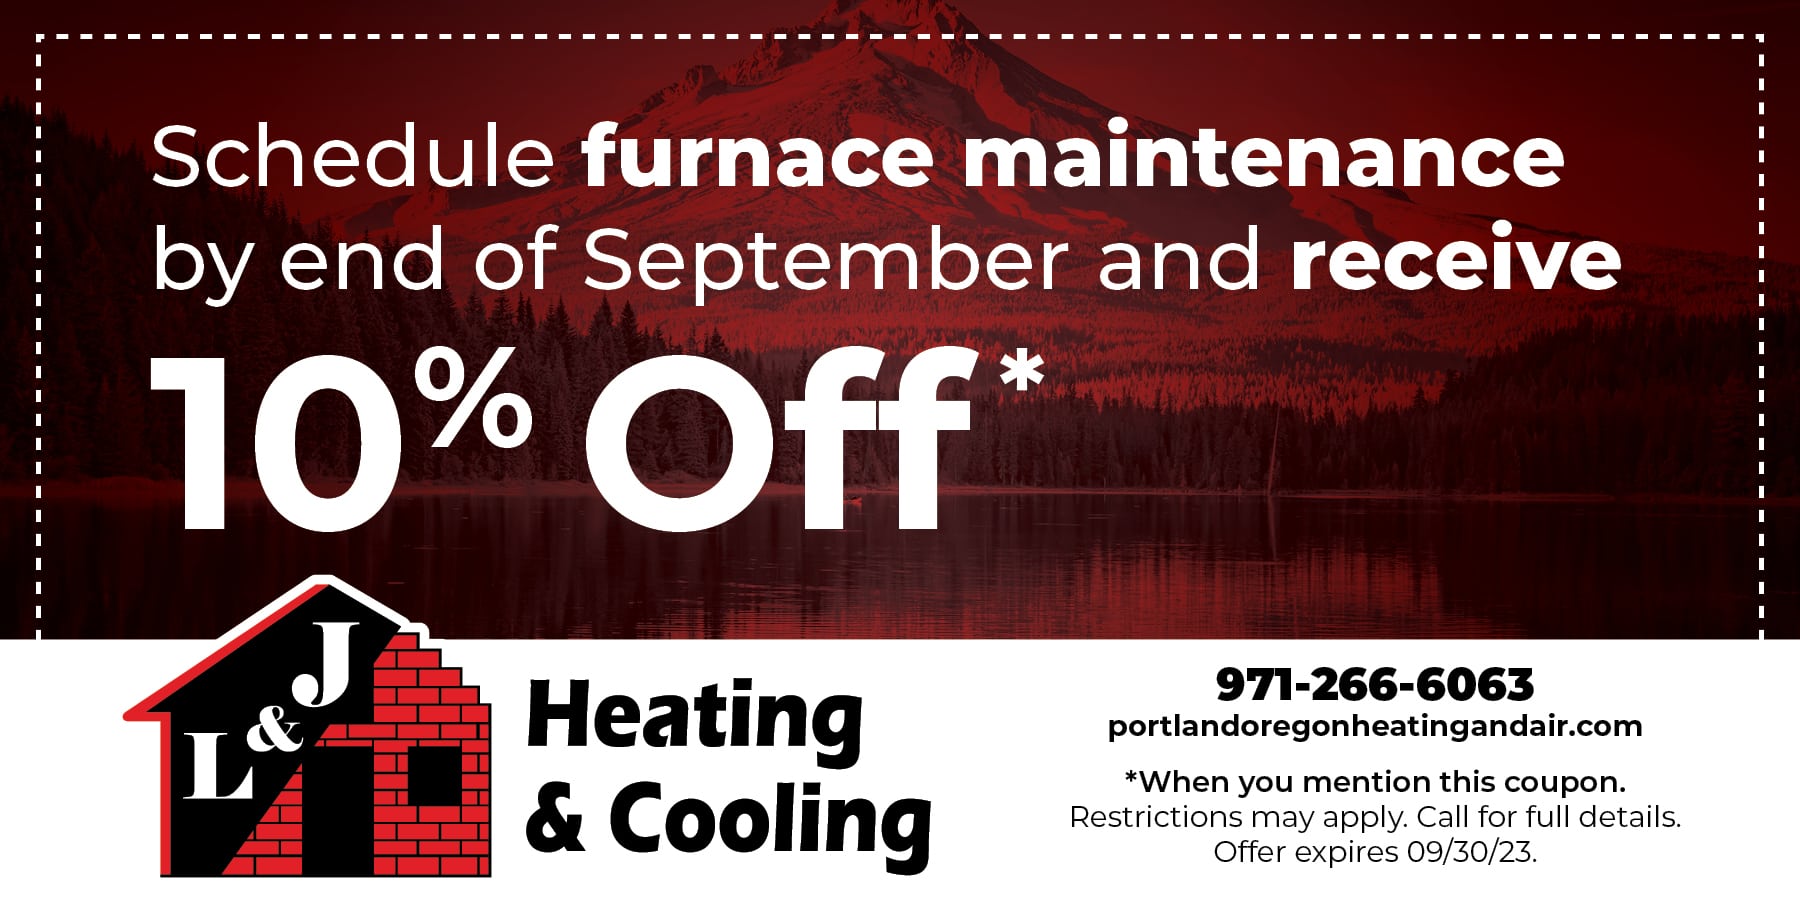 10% off furnace maintenance when you schedule by the end of September.